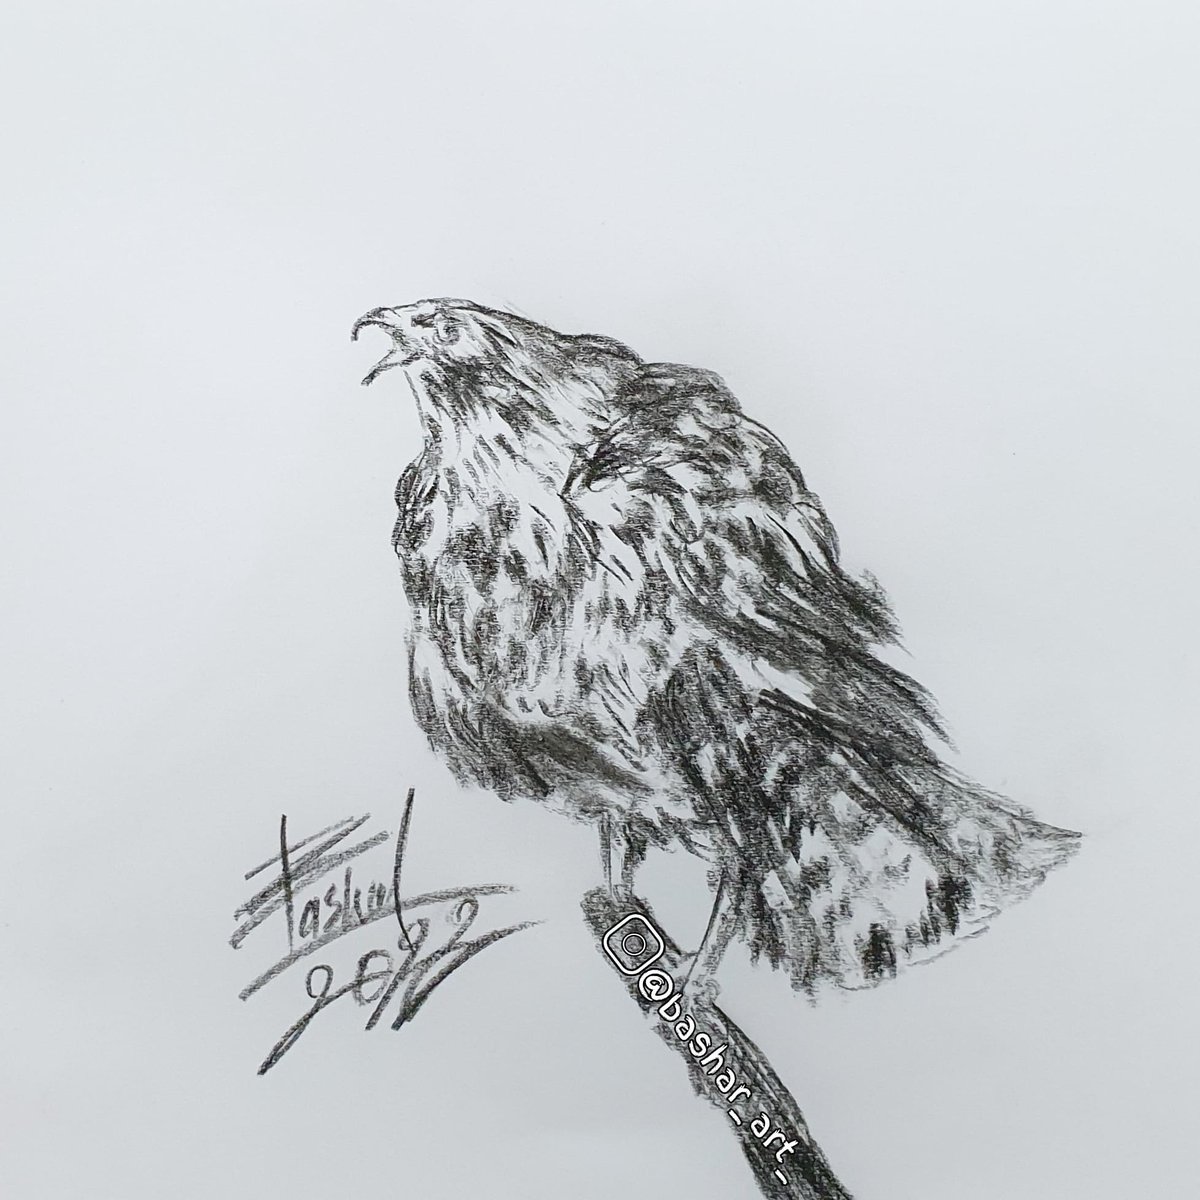 My artwork
Eagle .. by charcoal 
#Eagles #charcoal #coal #charcoalart #ArtistOnTwitter #artist #art #artwork #drawing #drawingart #draw #painting #paint #painter #ArtificialIntelligence #paintedphotography #birds #BirdTwitter #BirdWorld